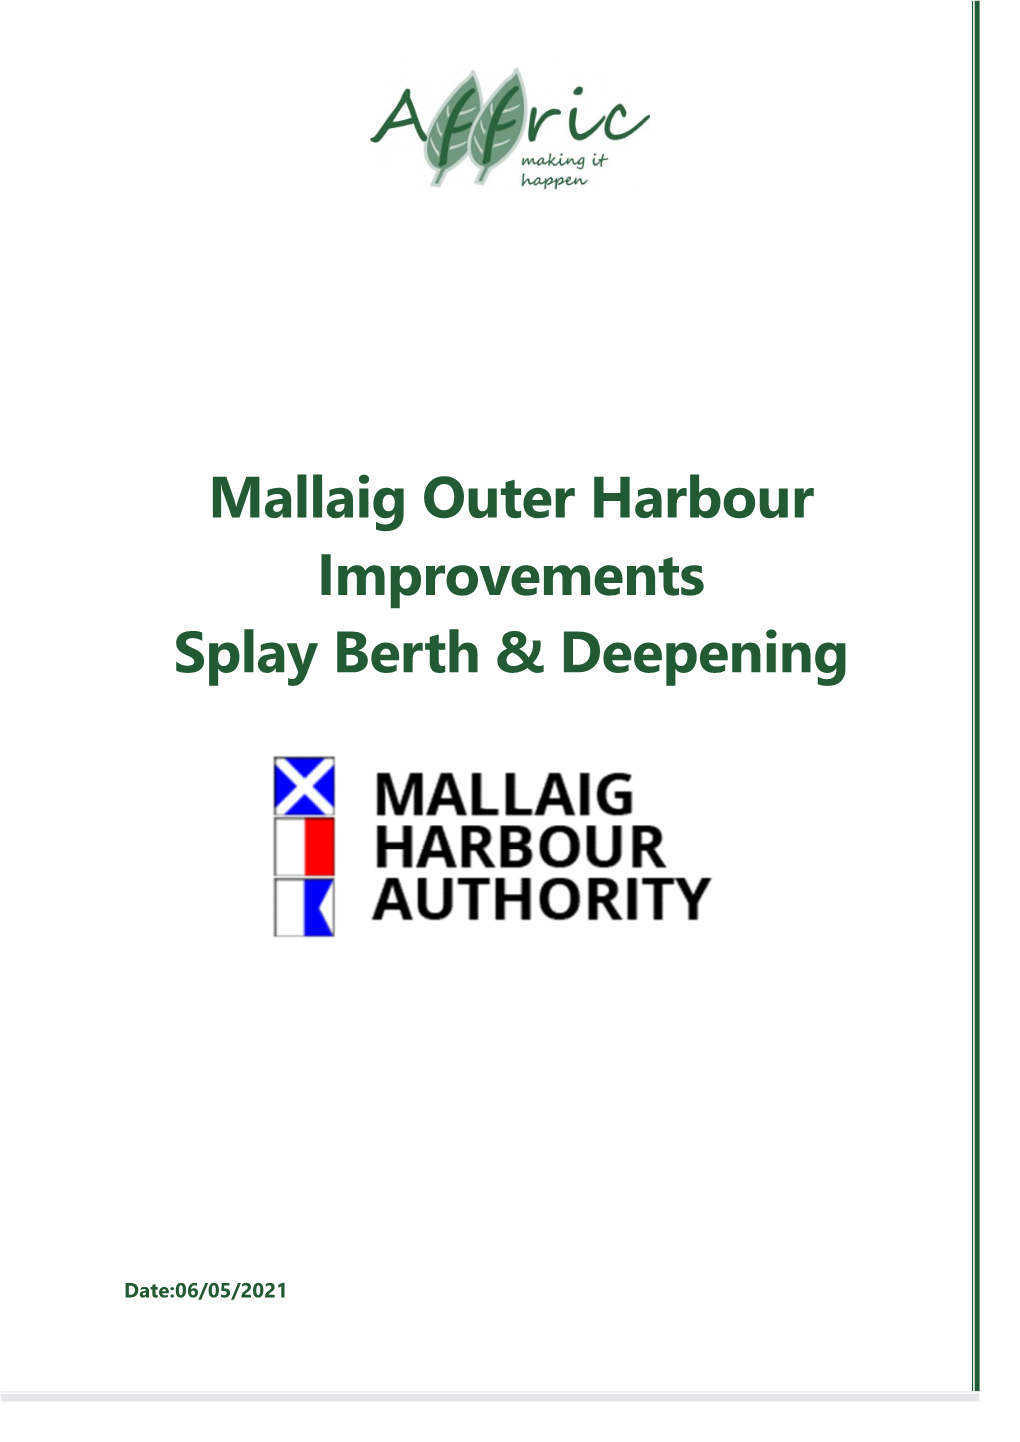 Mallaig Outer Harbour Improvements Splay Berth Deepening